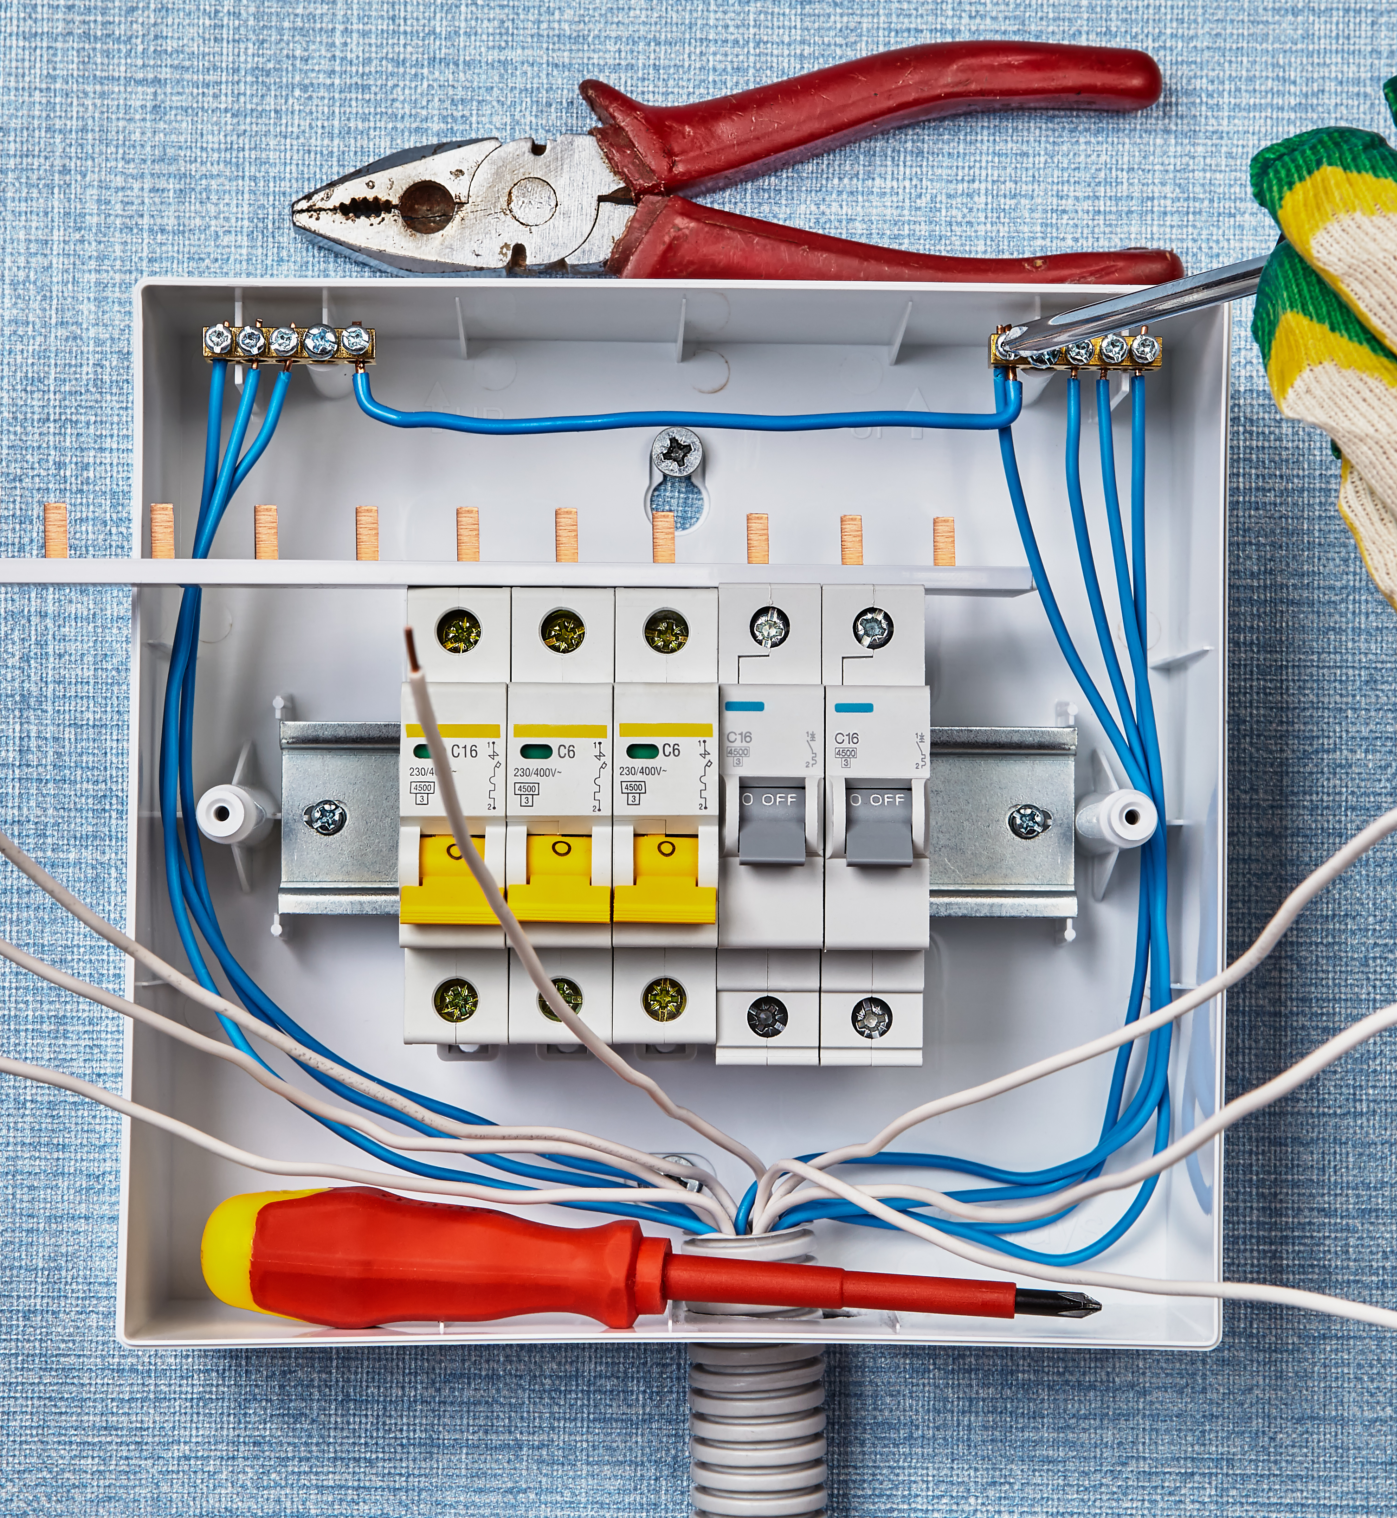 Electrical work permit